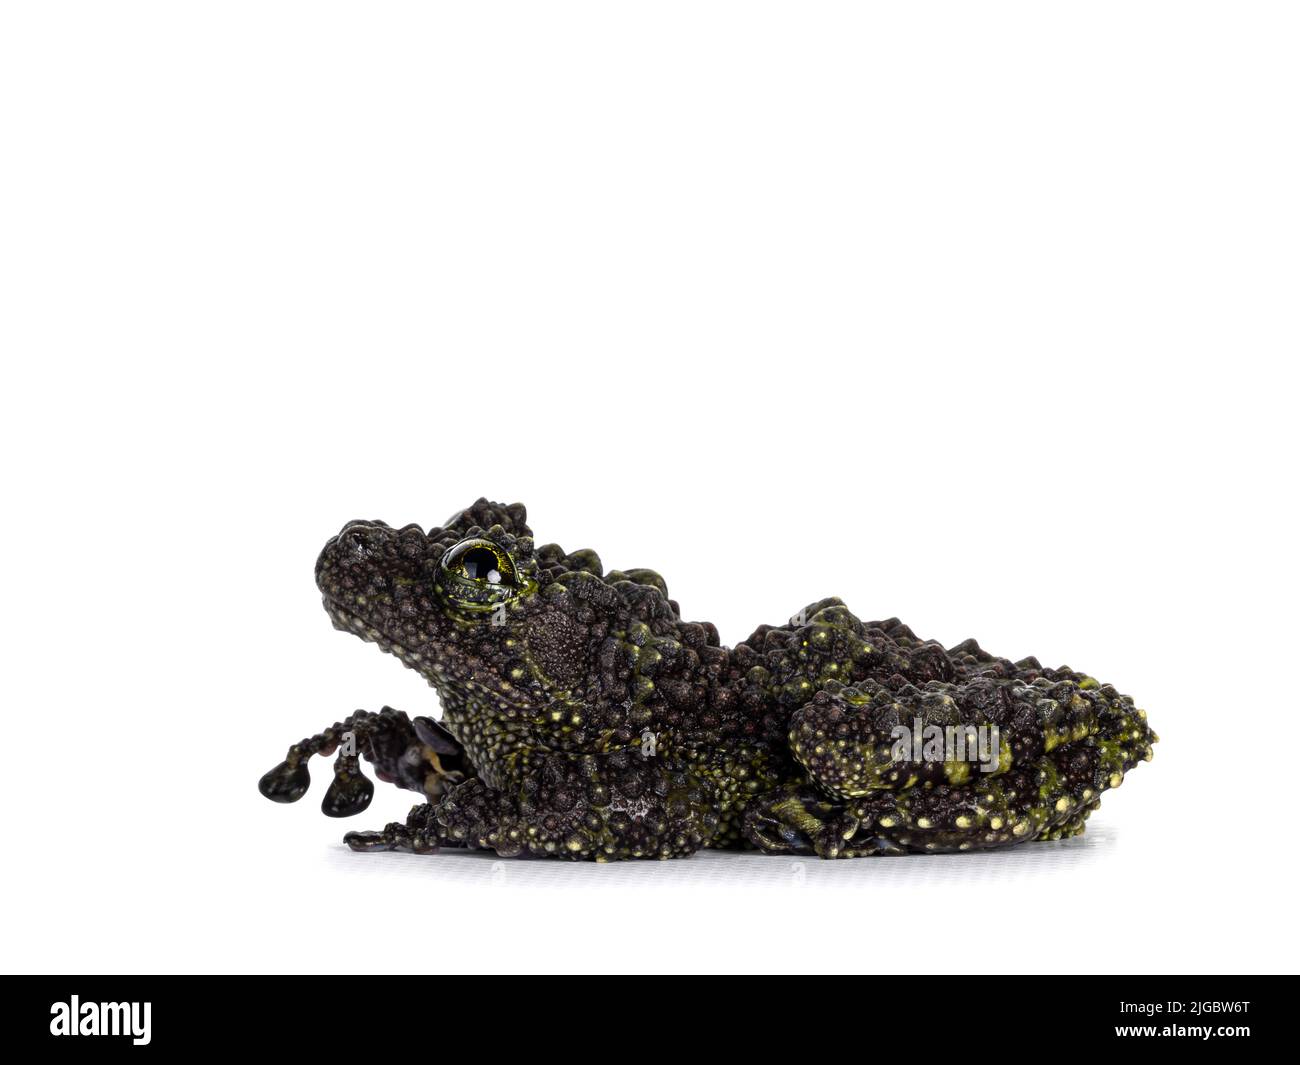 Mossy frog aka Theloderma corticale, sitting side ways. Isolated on a white background. One paw lifted in air. Stock Photo